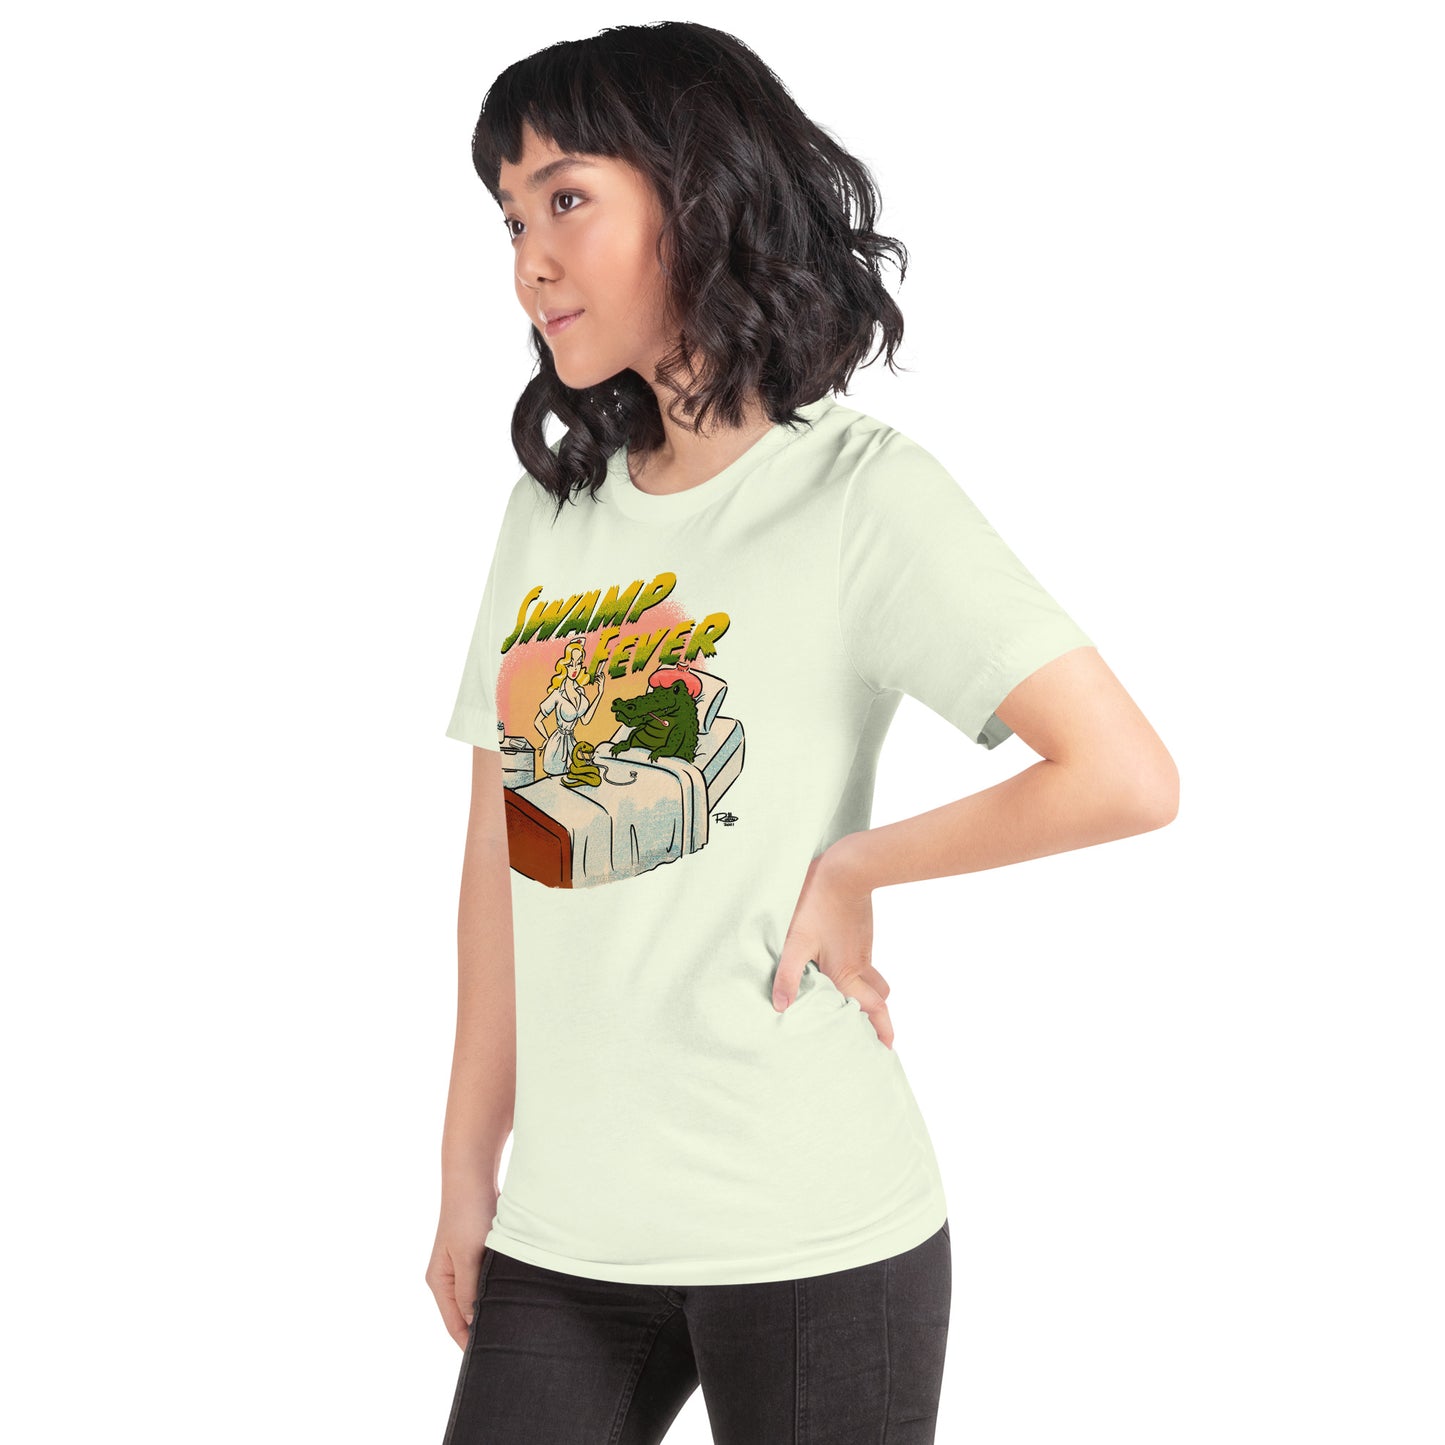 Swamp Fever Elly May Unisex t-shirt